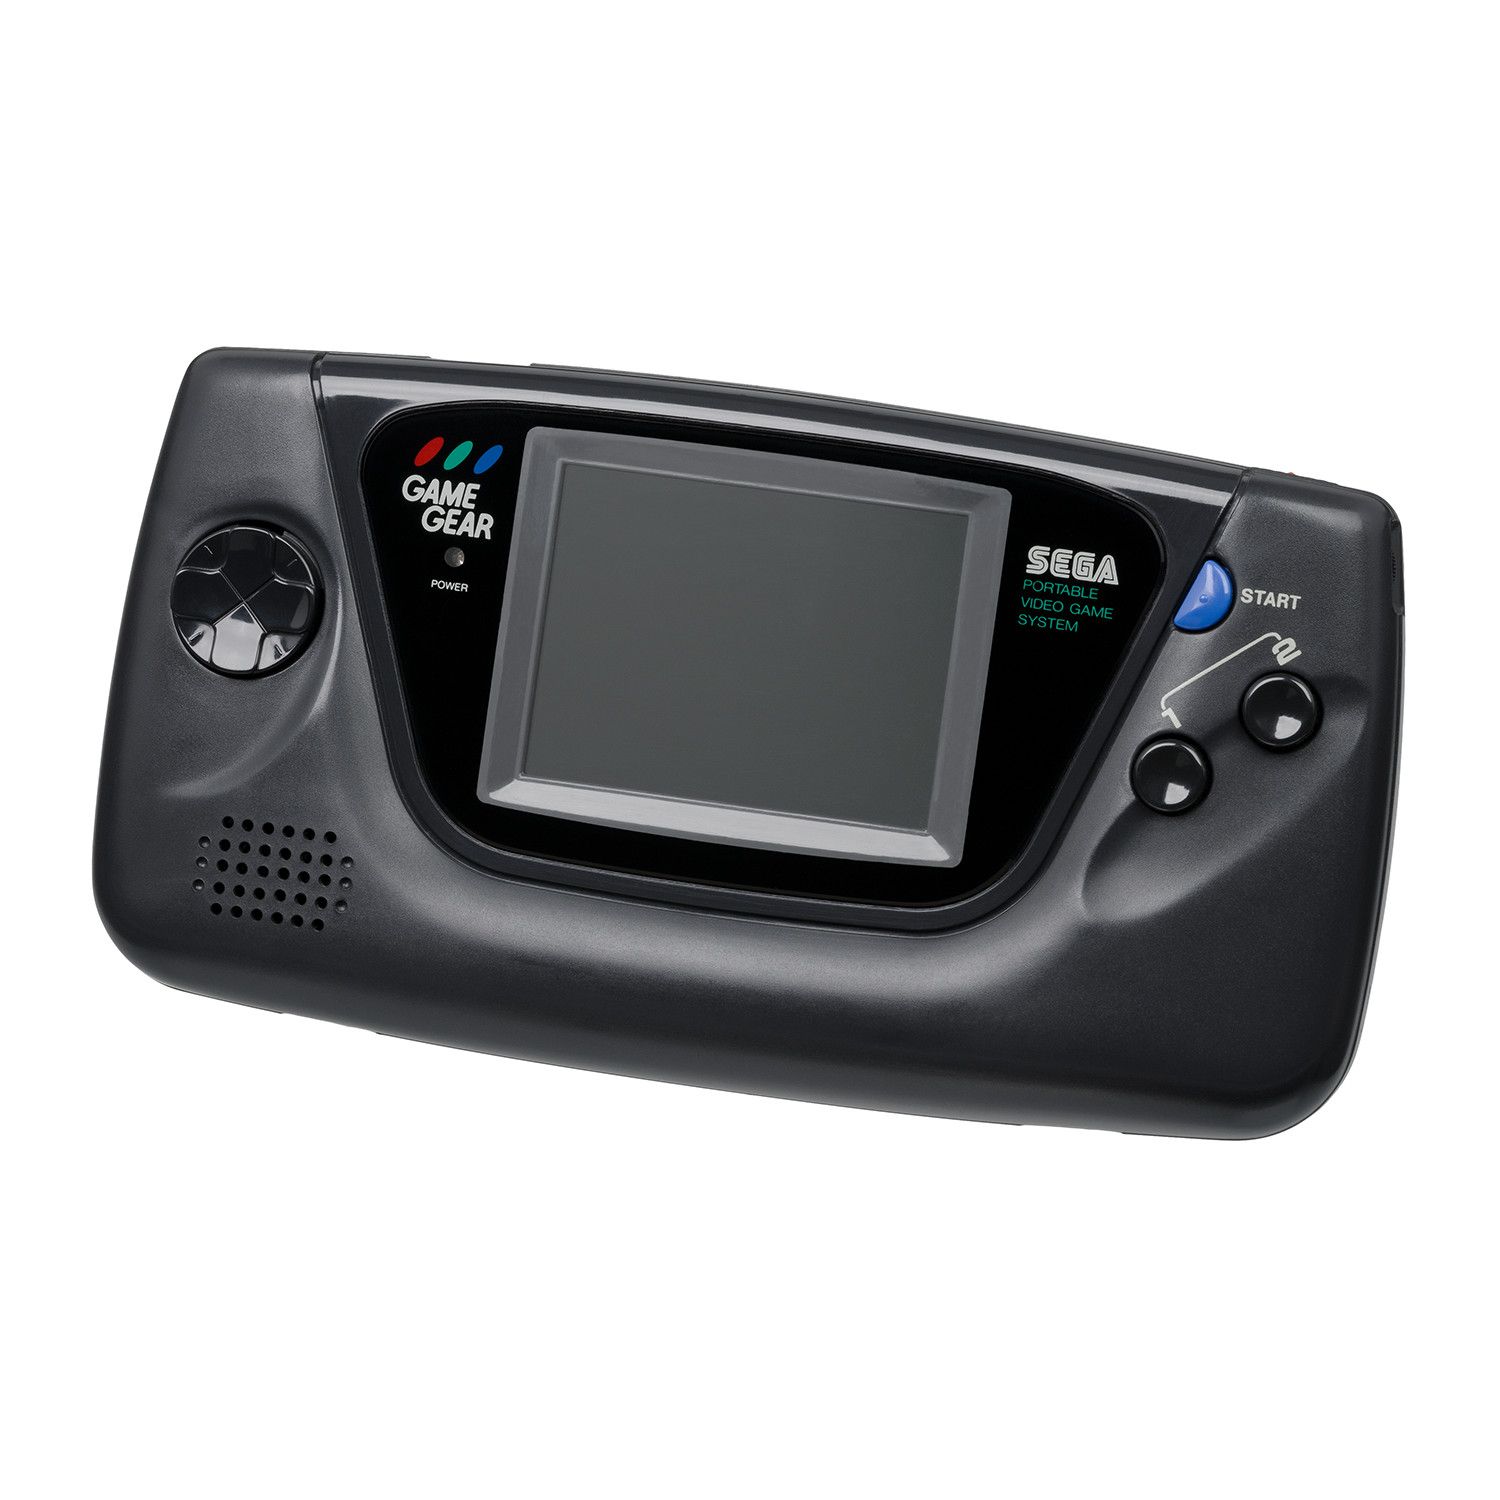 old handheld gaming systems